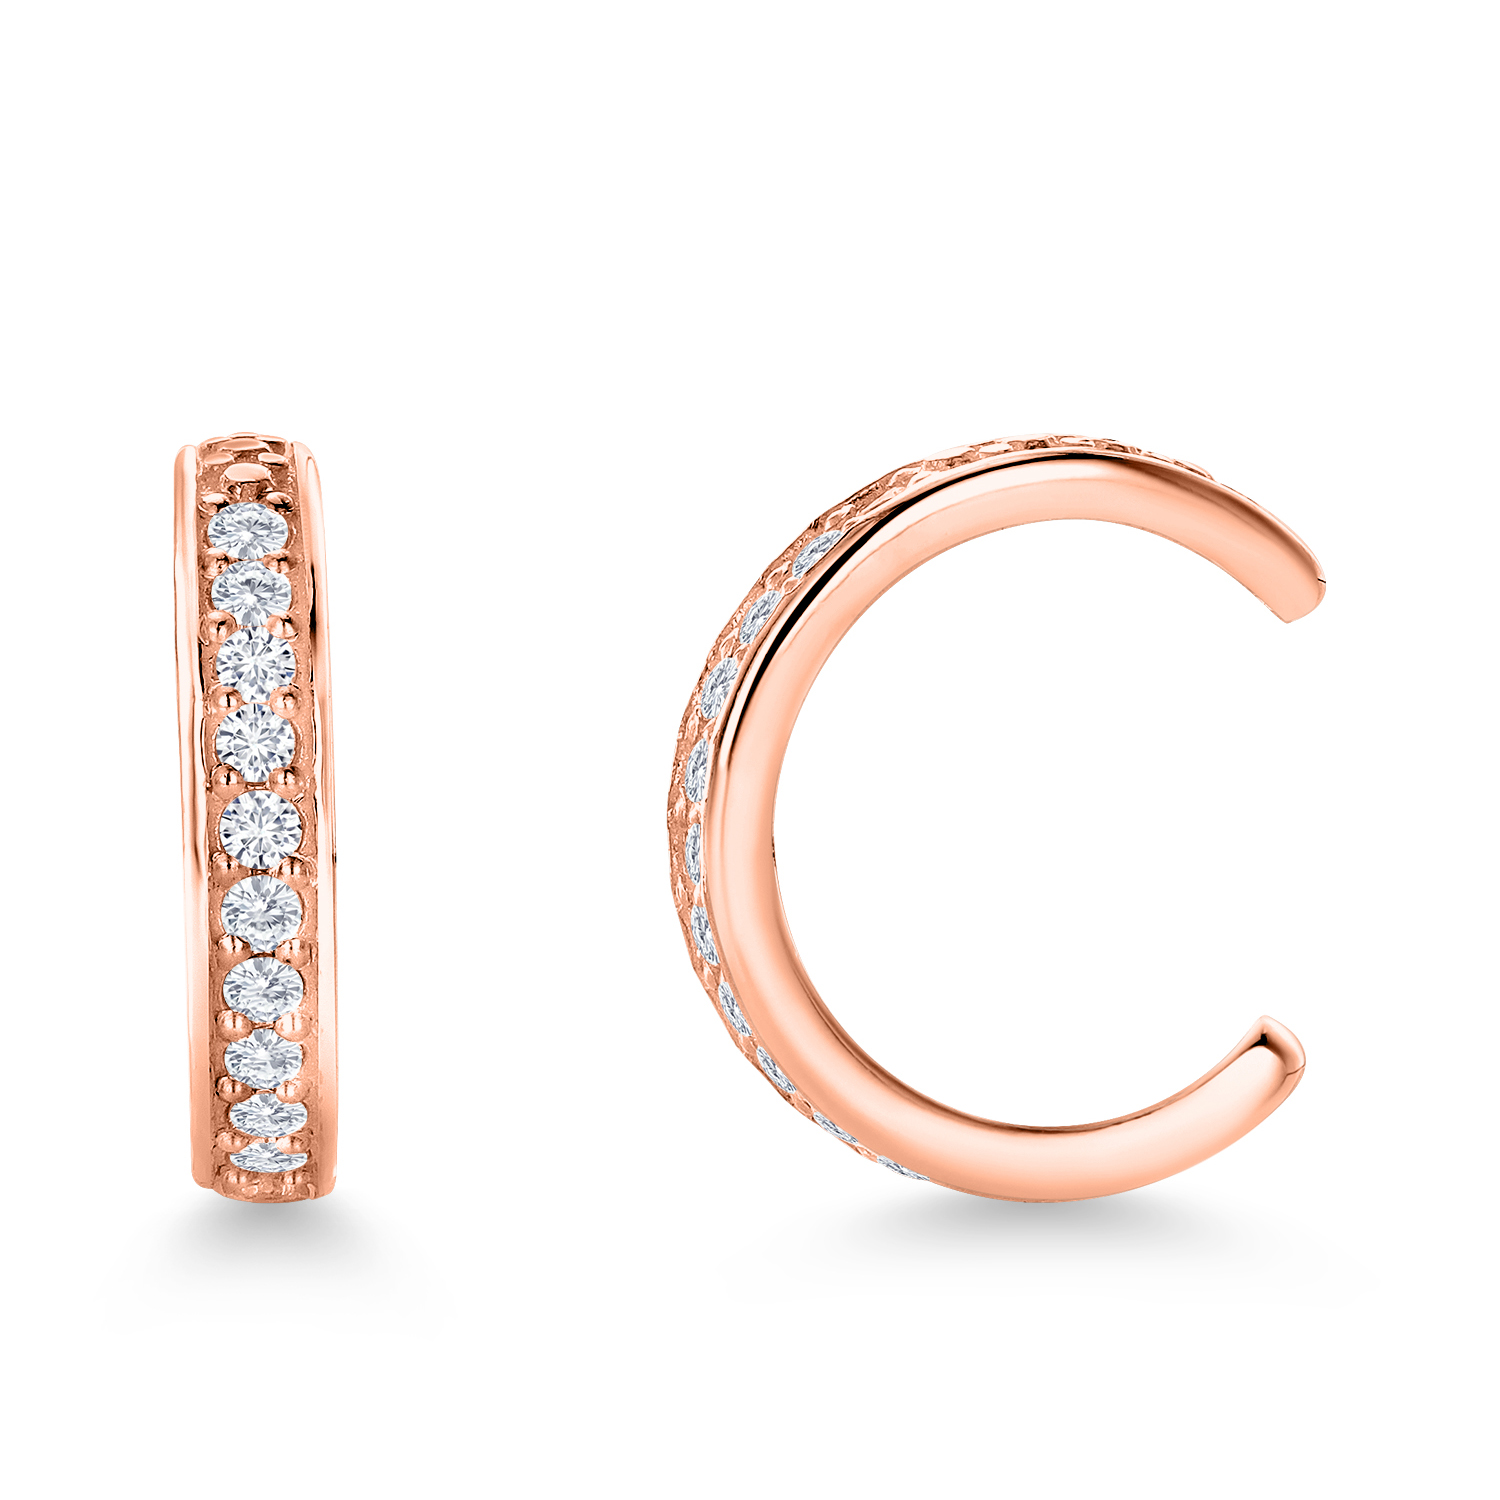 Gem Stone King 18K Rose Gold Plated Silver White Lab Grown Diamond Channel Cuff Earrings For Women (0.10 cttw)